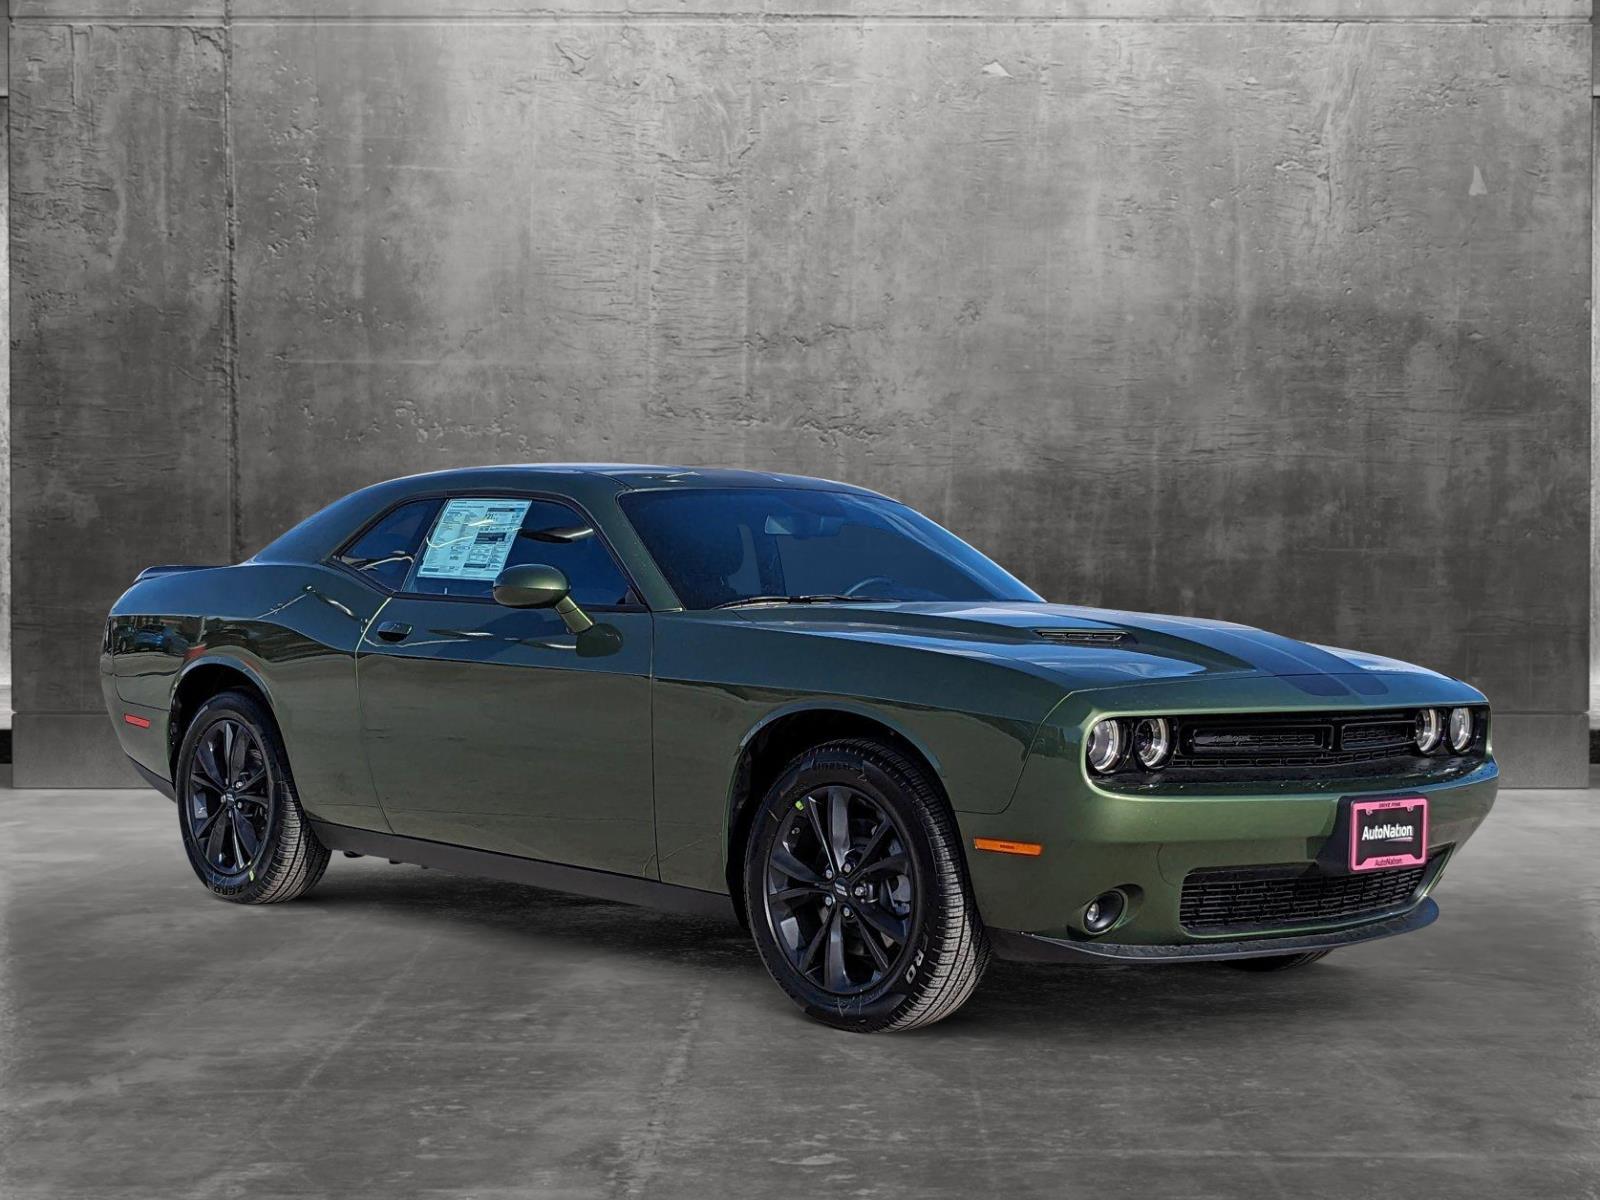 NEW 2023 Dodge Challenger for sale in Colorado Springs, CO, 80923